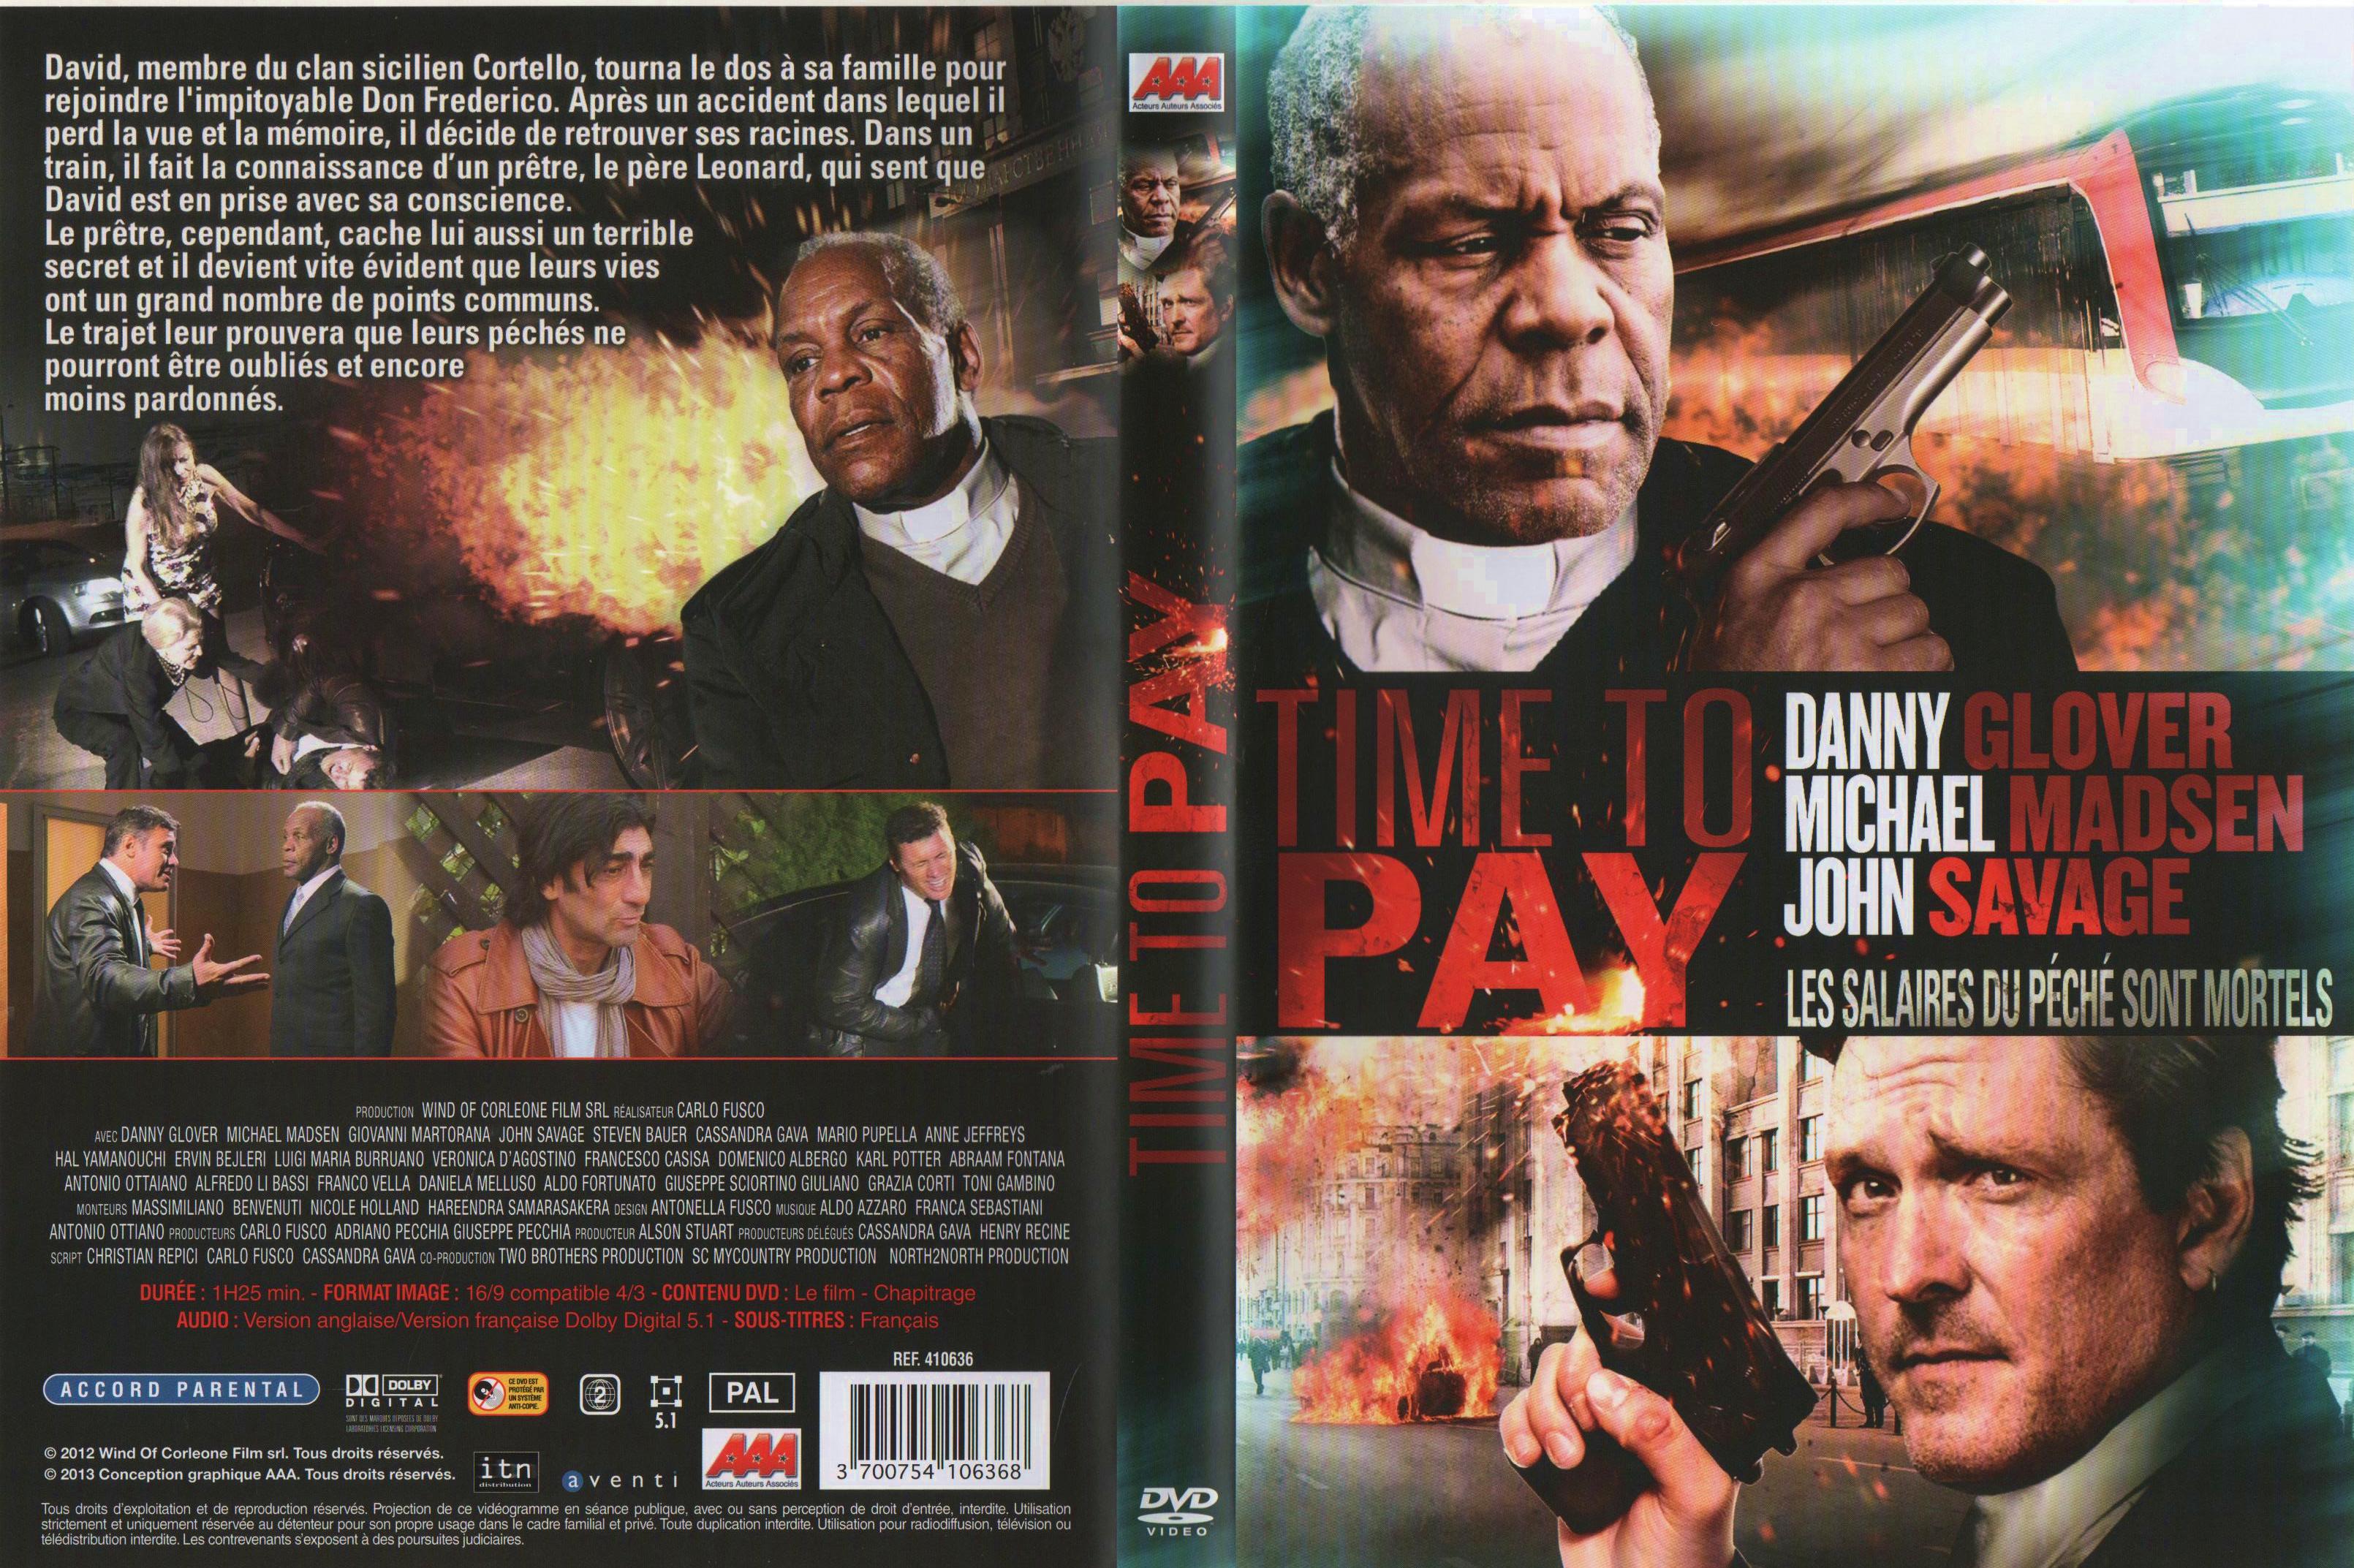 Jaquette DVD Time to pay